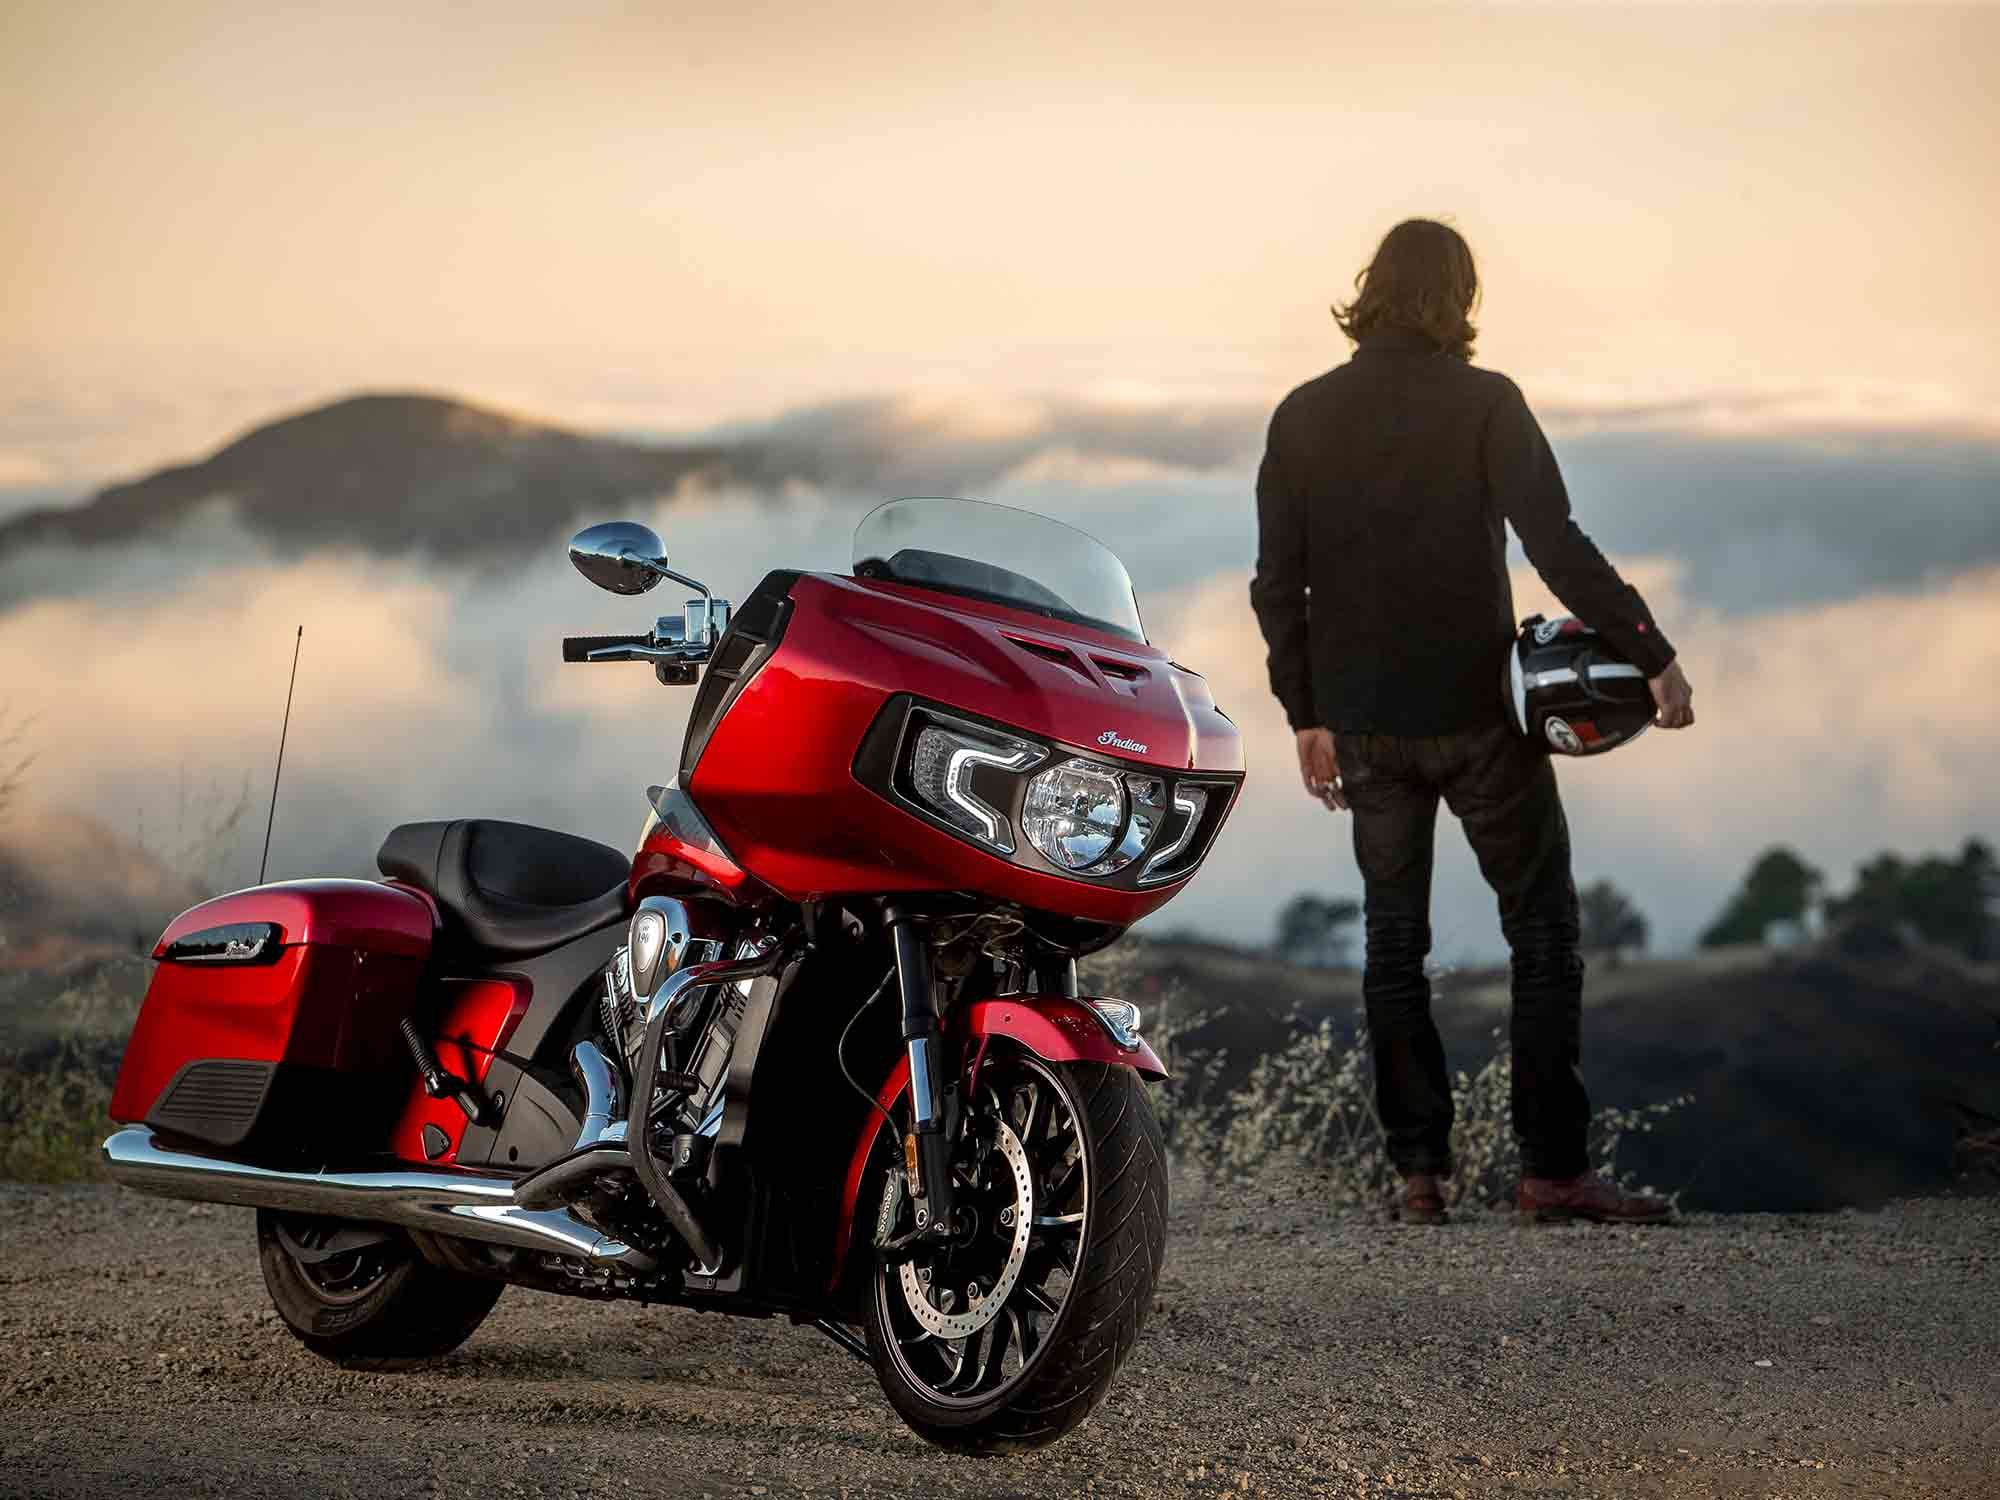 The Indian Challenger is <em>Cycle World</em>’s Best Cruiser for 2020.